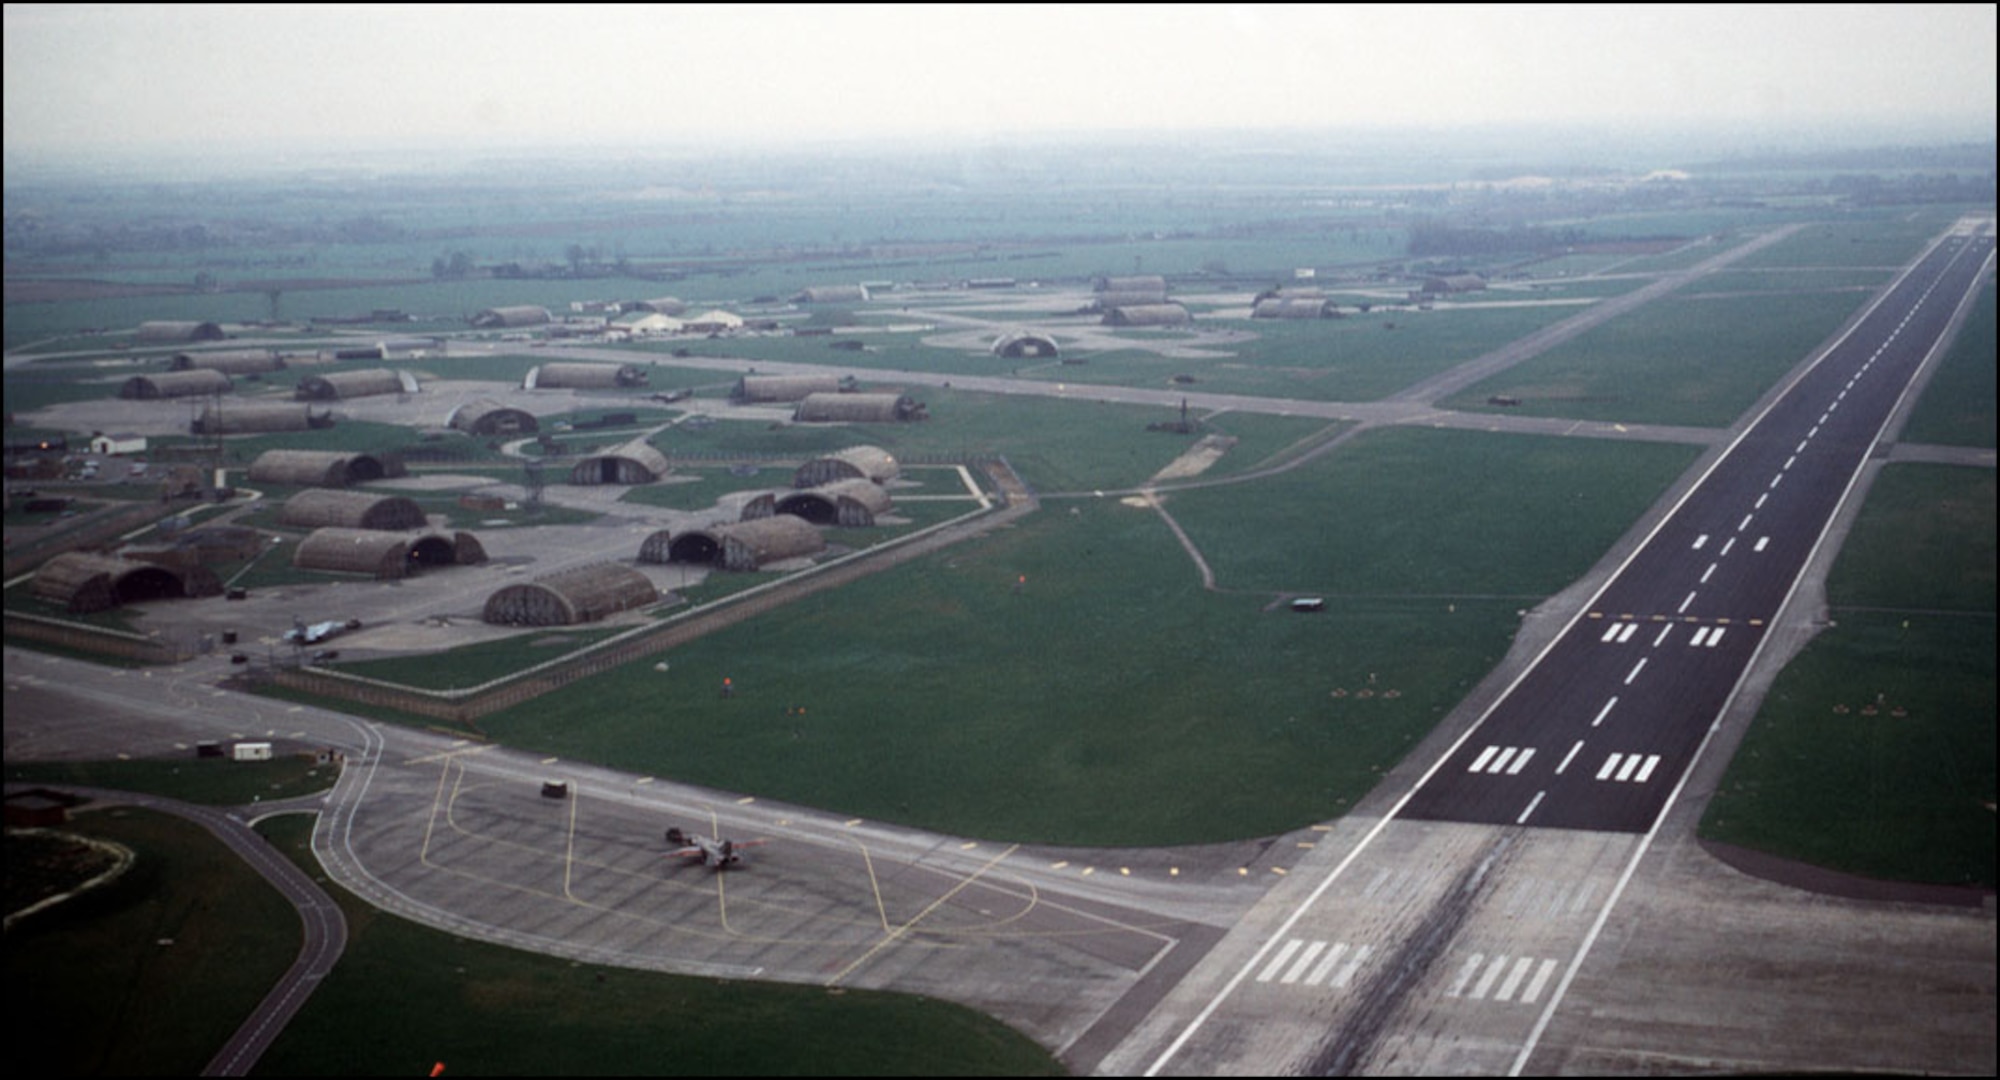 The 20th Fighter Wing was stationed at Royal Air Force Upper Heyford, Oxfordshire, England, from 1970 to 1994. Hardened shelters on the installation were used as a defensive measure to protect air assets in the event of an attack. (Courtesy photo from 20th Fighter Wing historian)